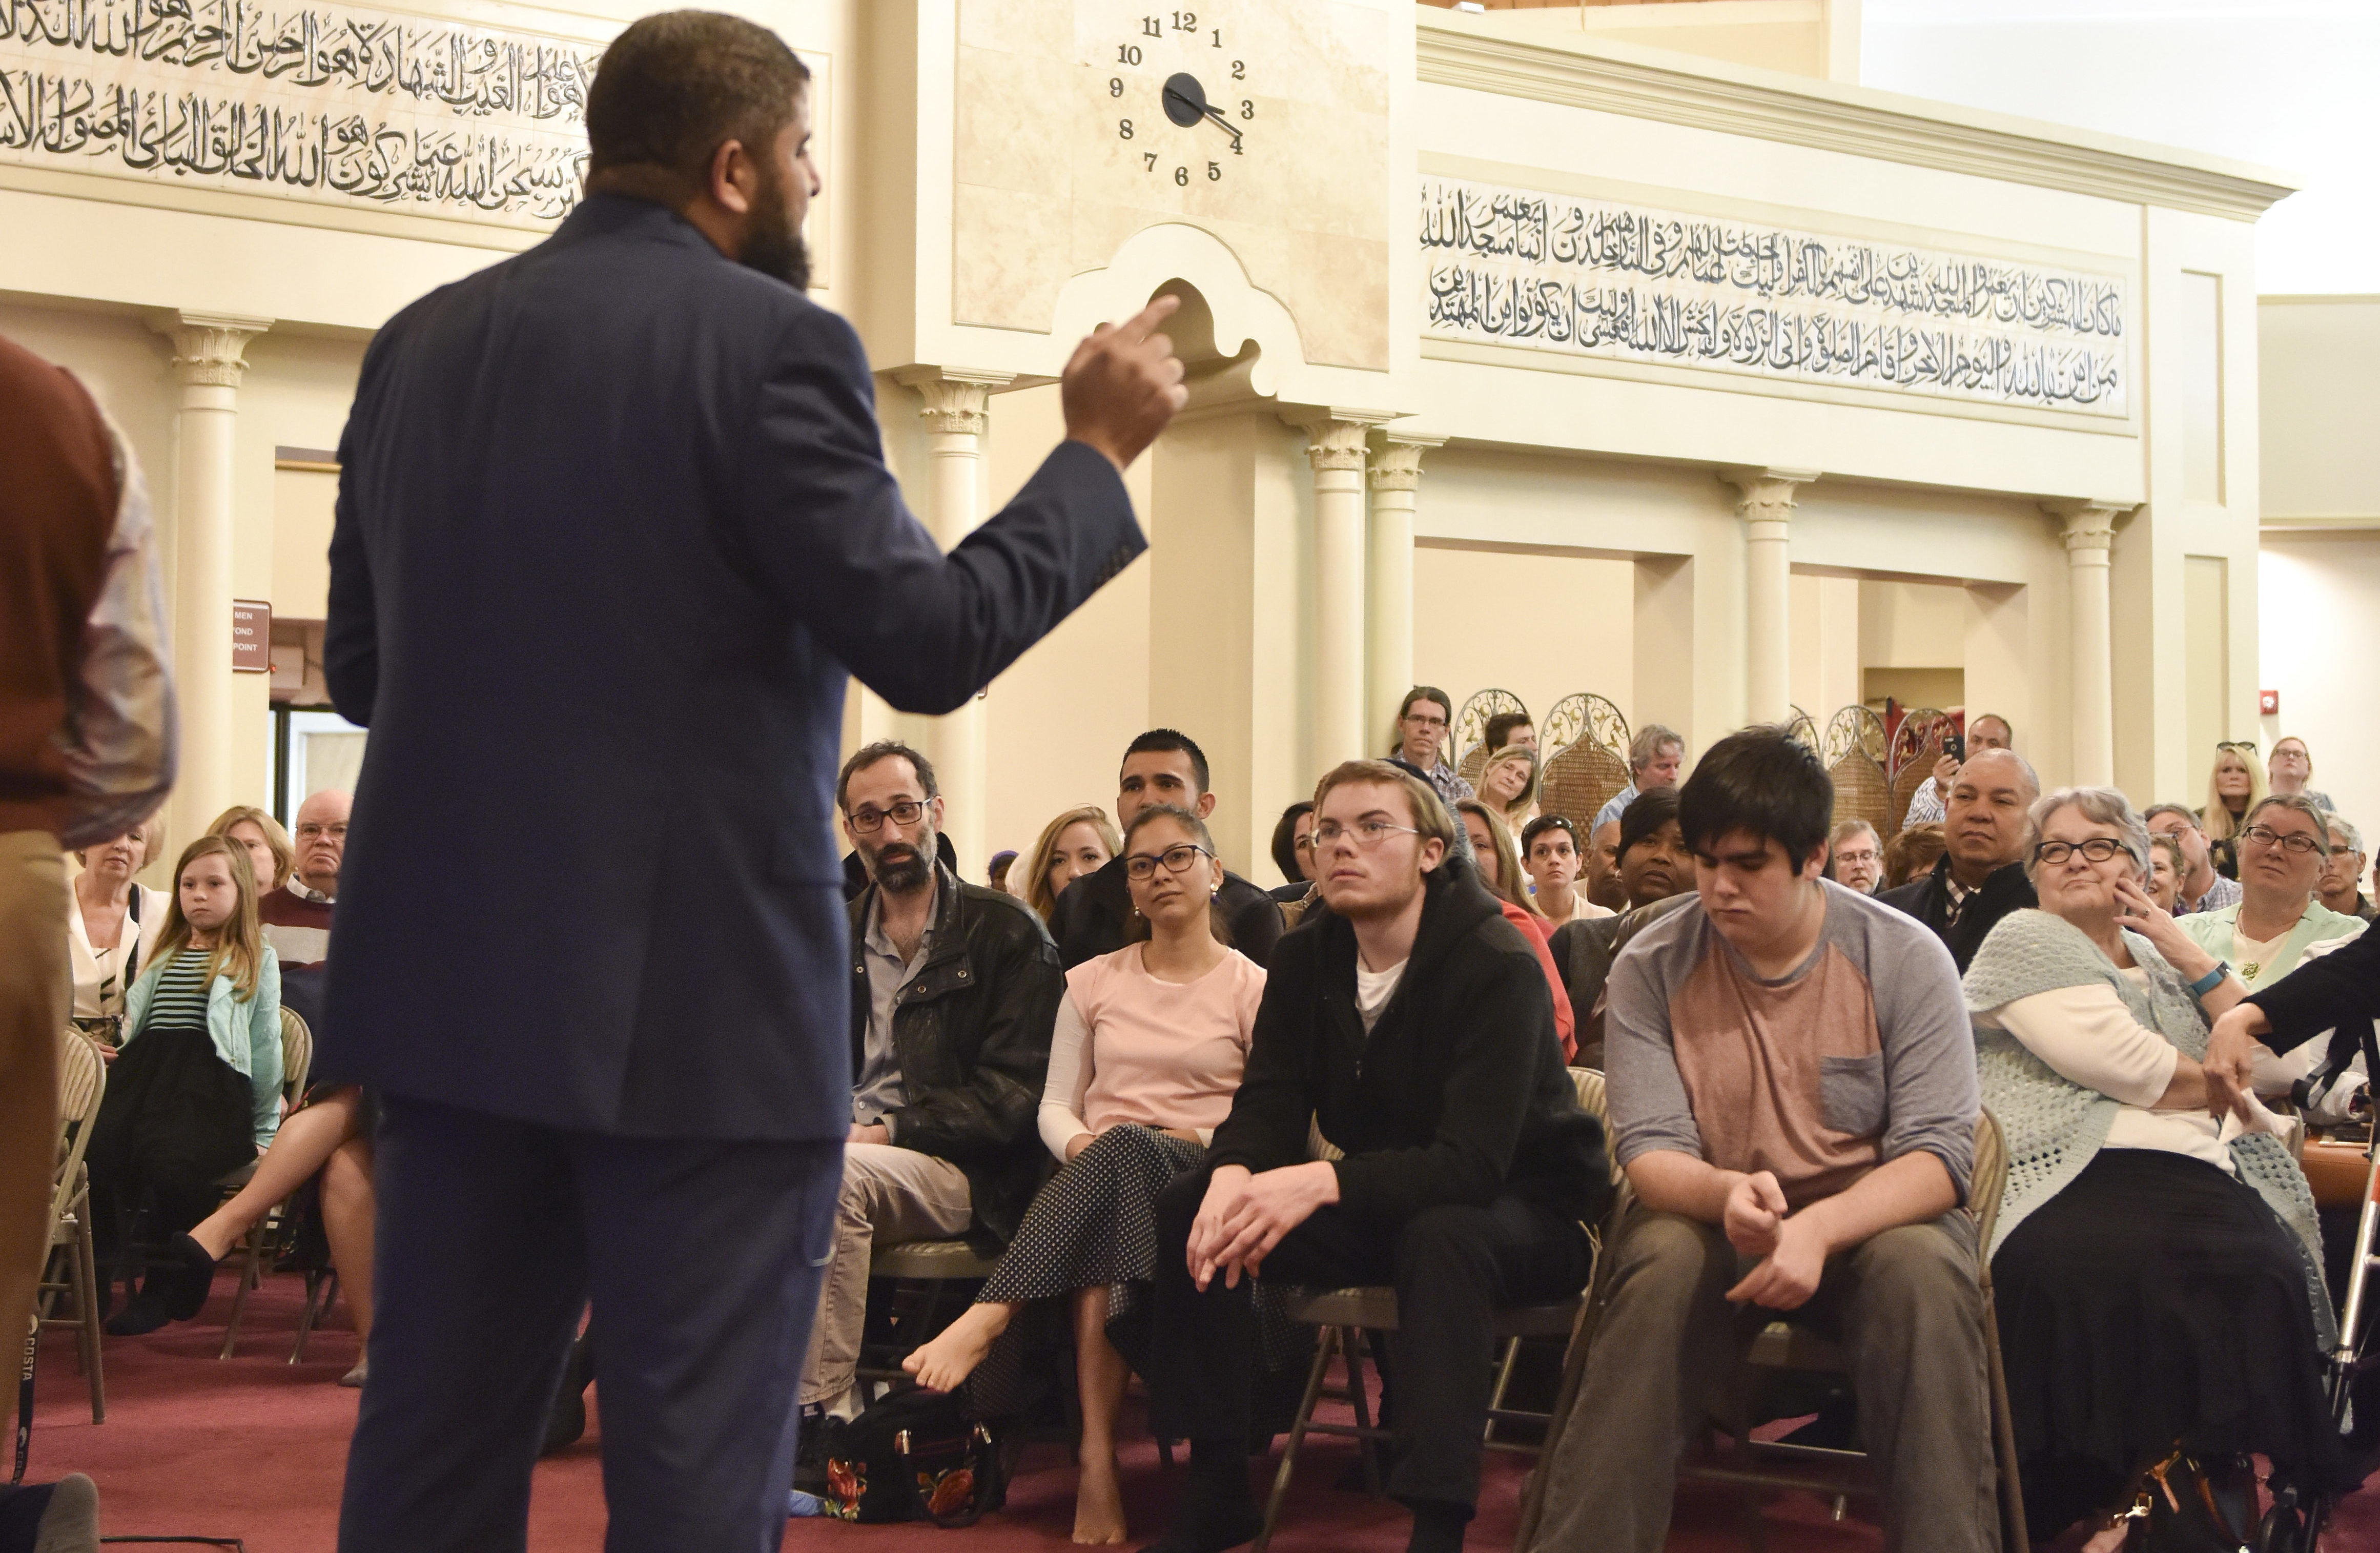 Inside the Birmingham Islamic Center with more than 1,000 other